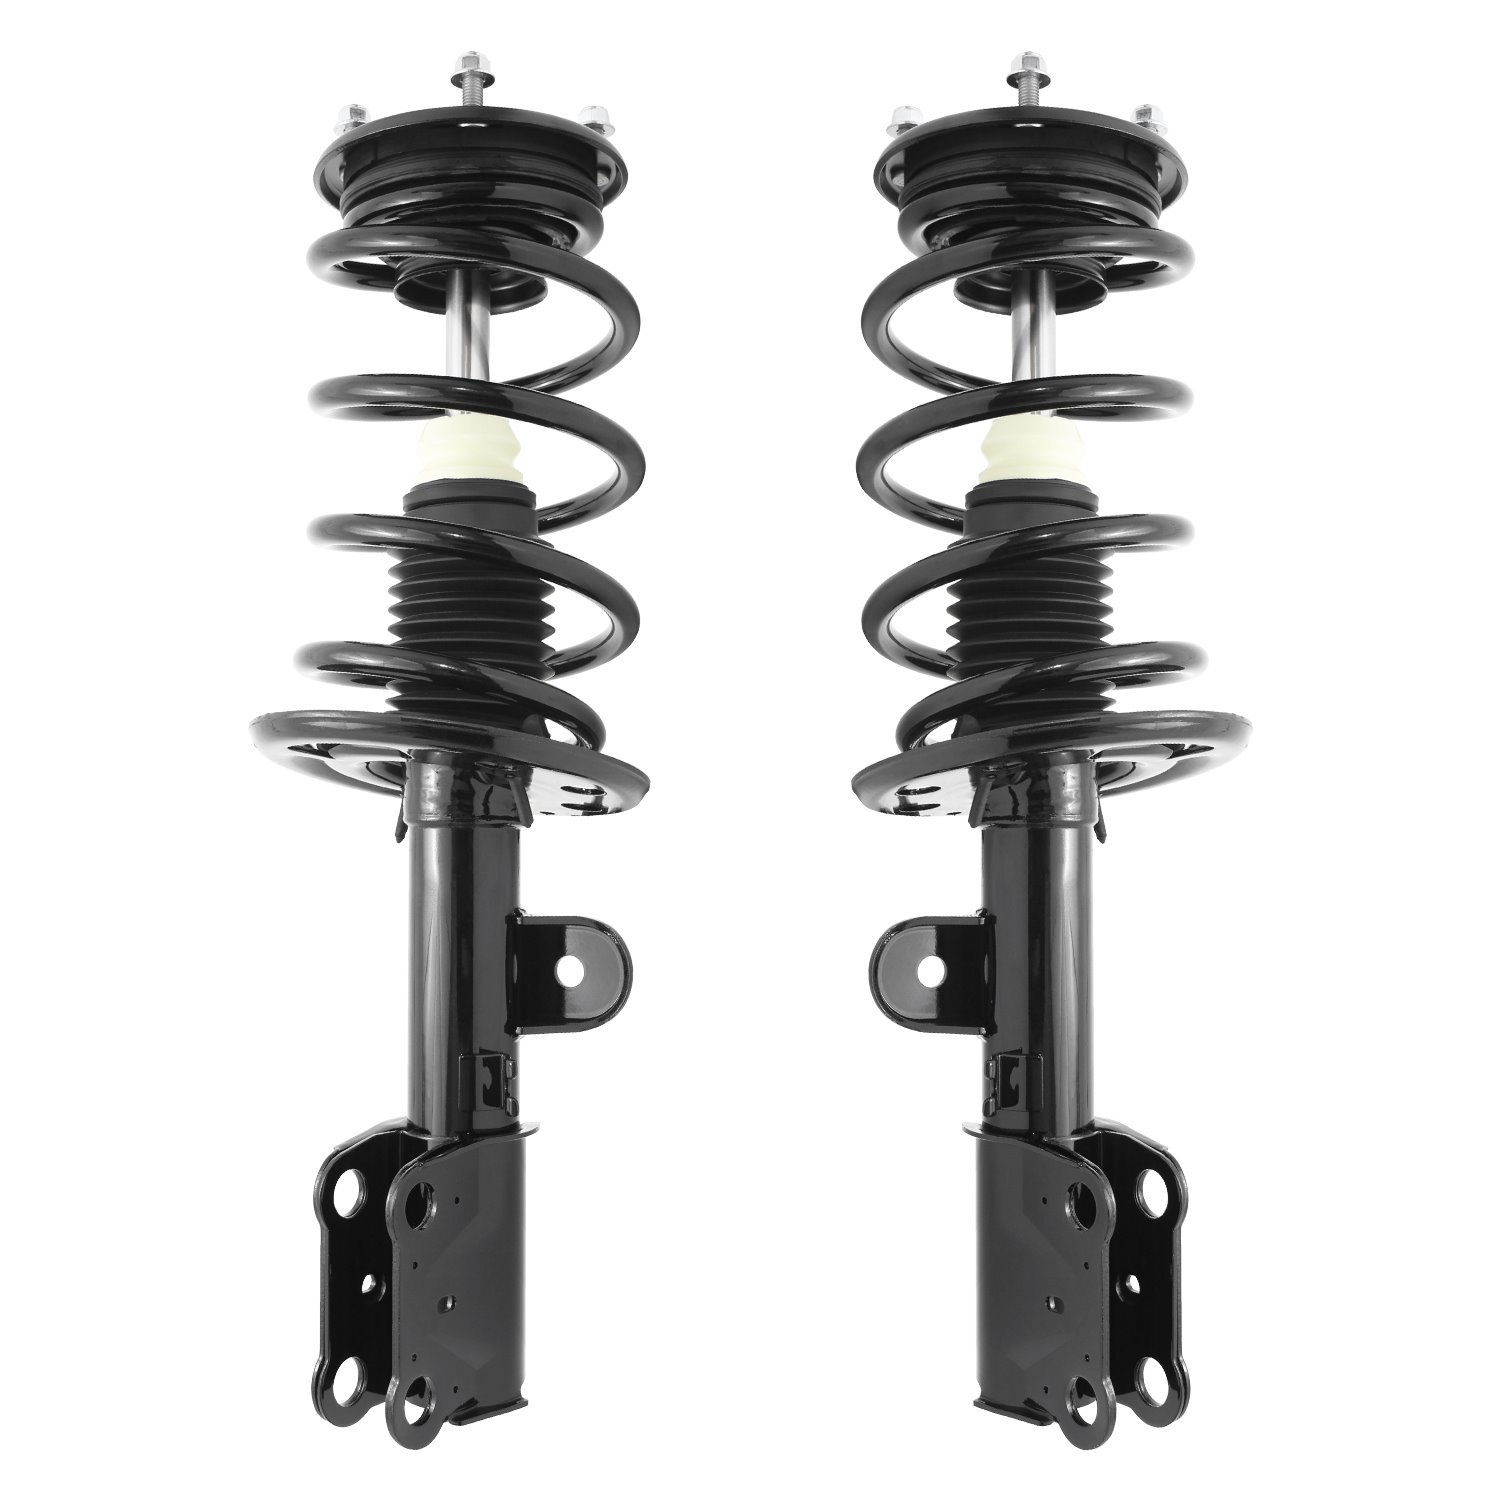 2-11547-11548-001 Suspension Strut & Coil Spring Assembly Set Fits Select Ford Taurus